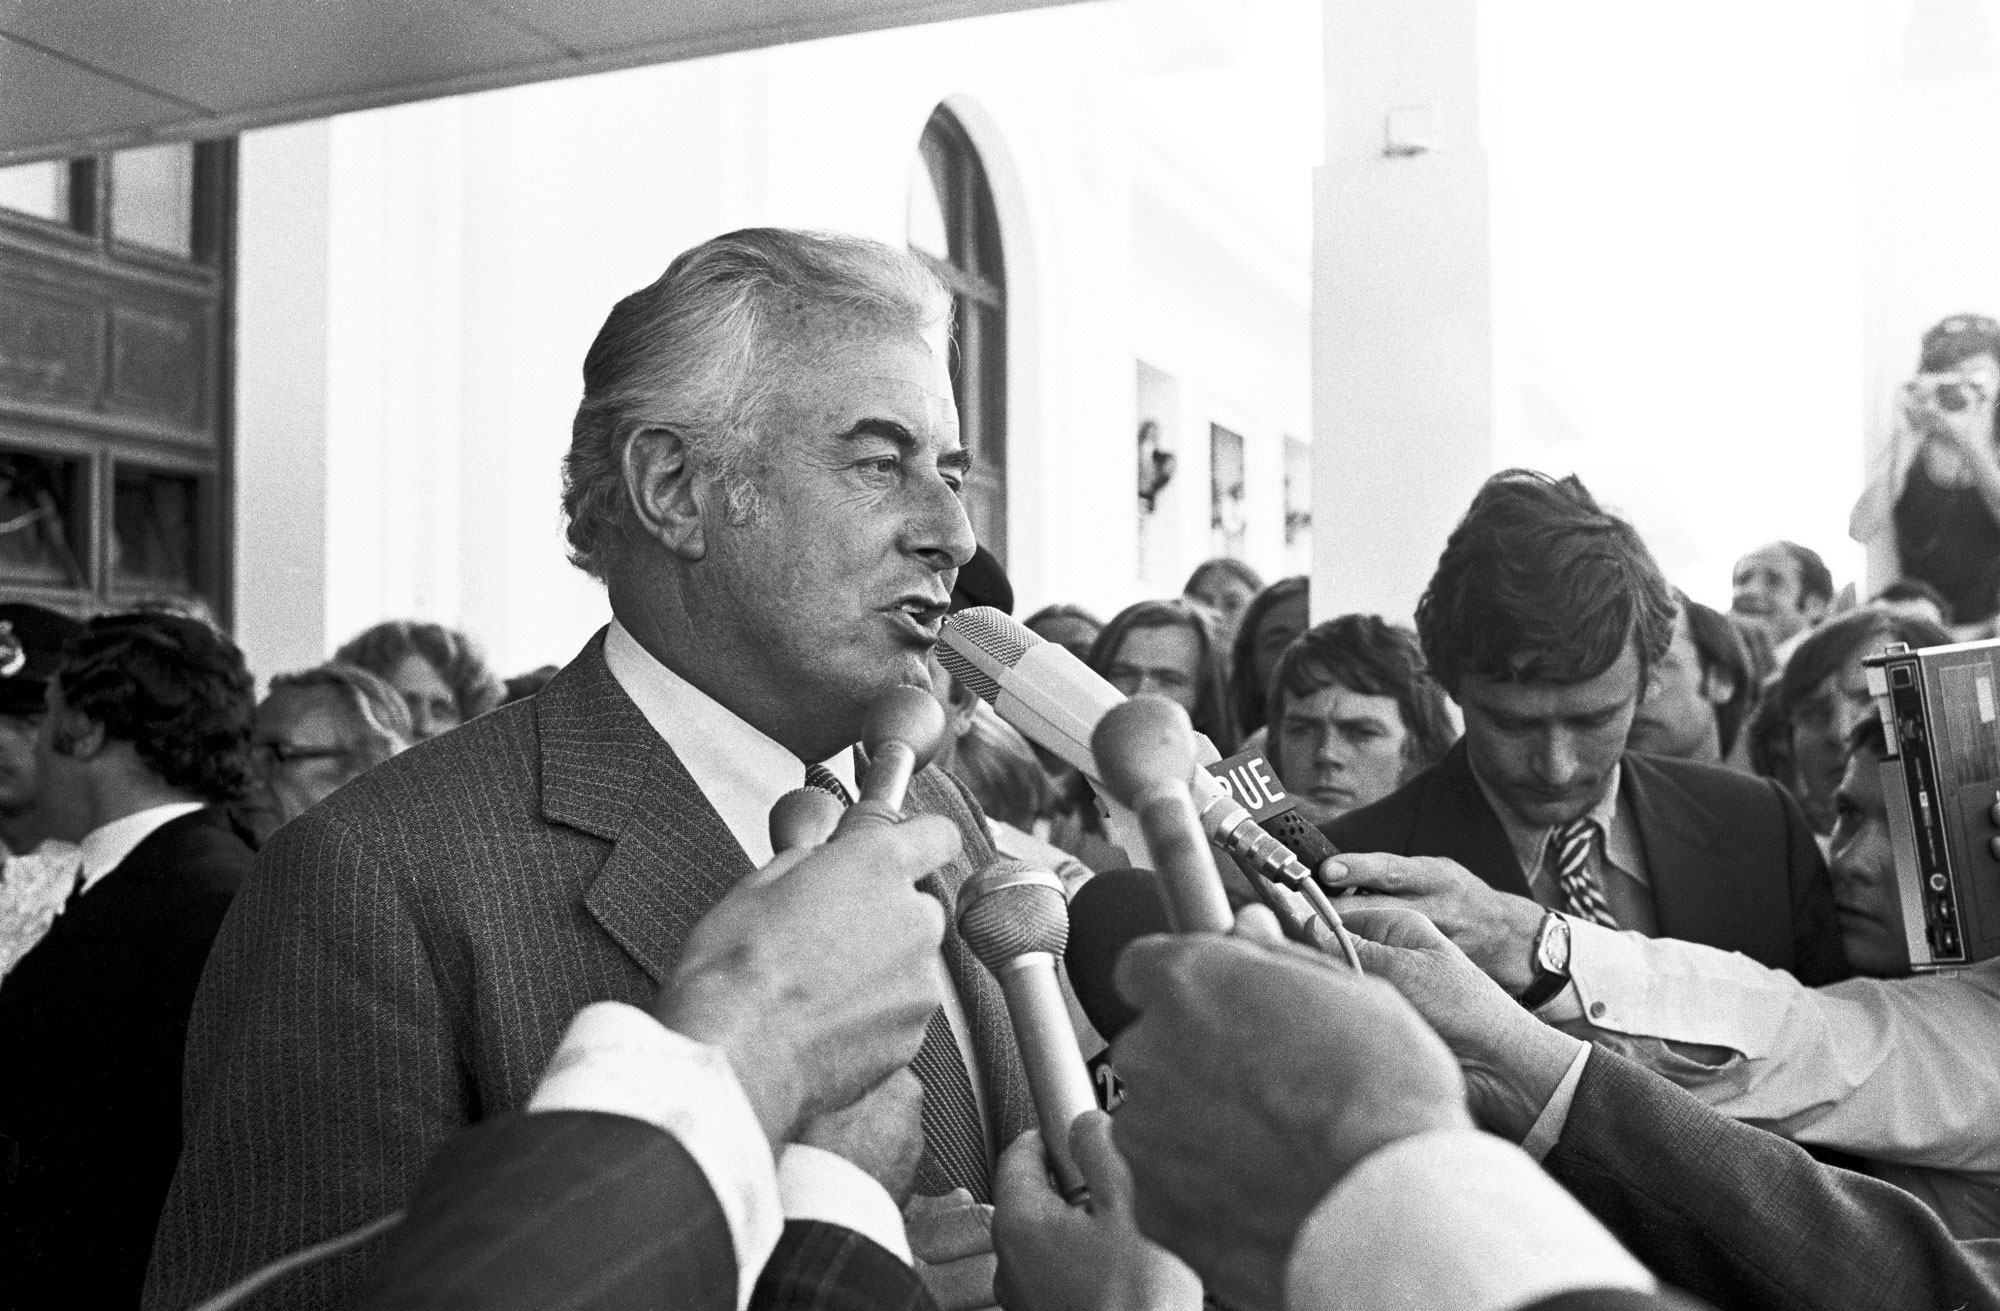 Gough Whitlam speaking after the dismissal of his government, 11 November 1975.